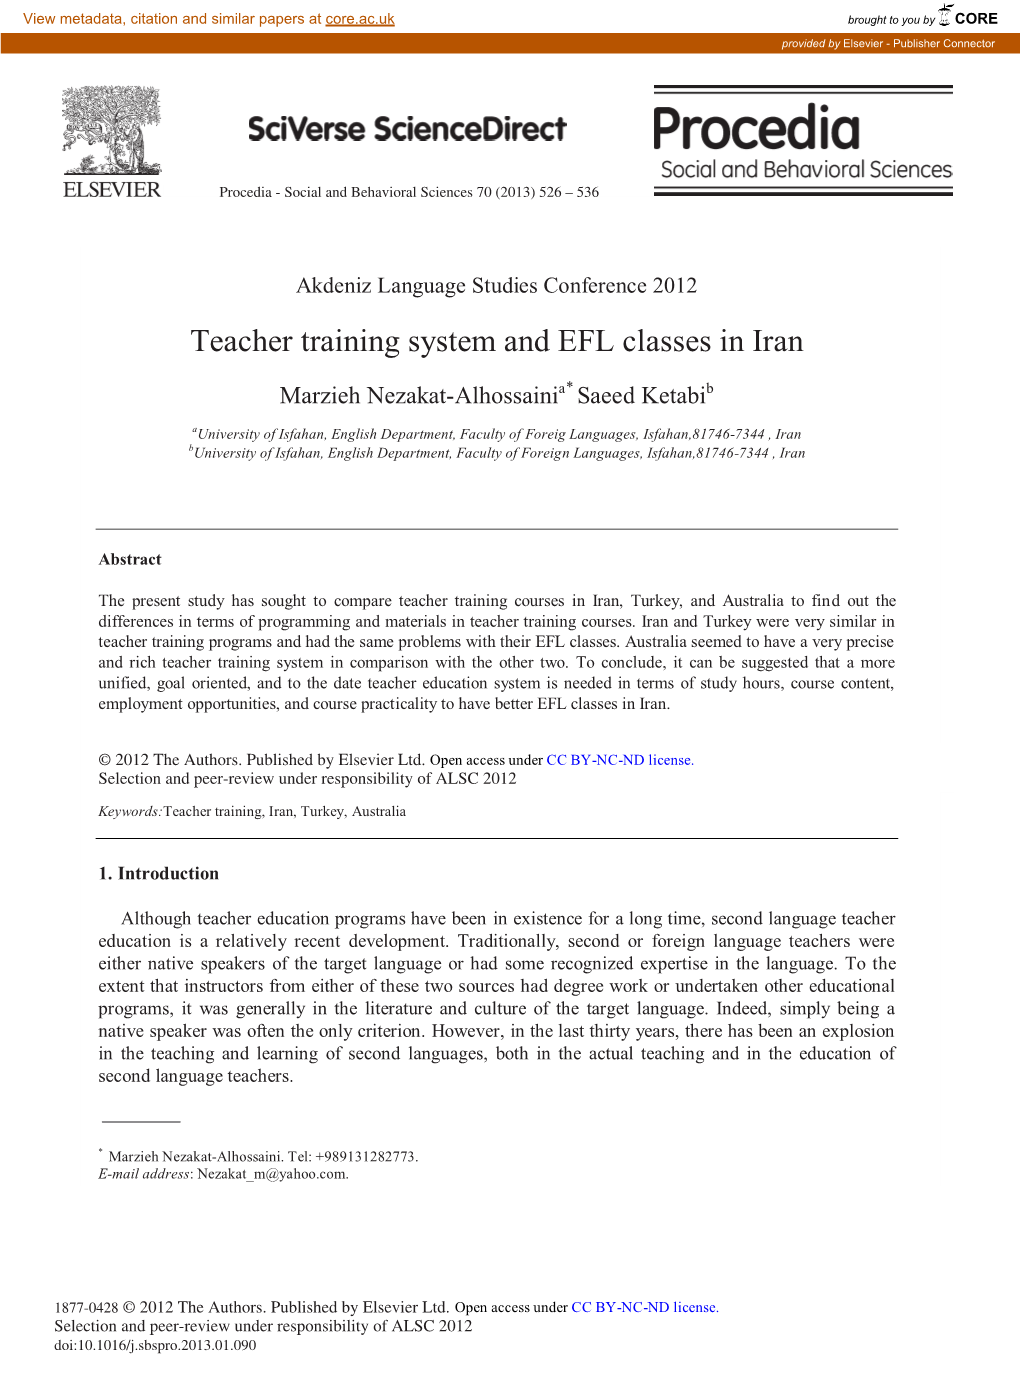 Teacher Training System and EFL Classes in Iran